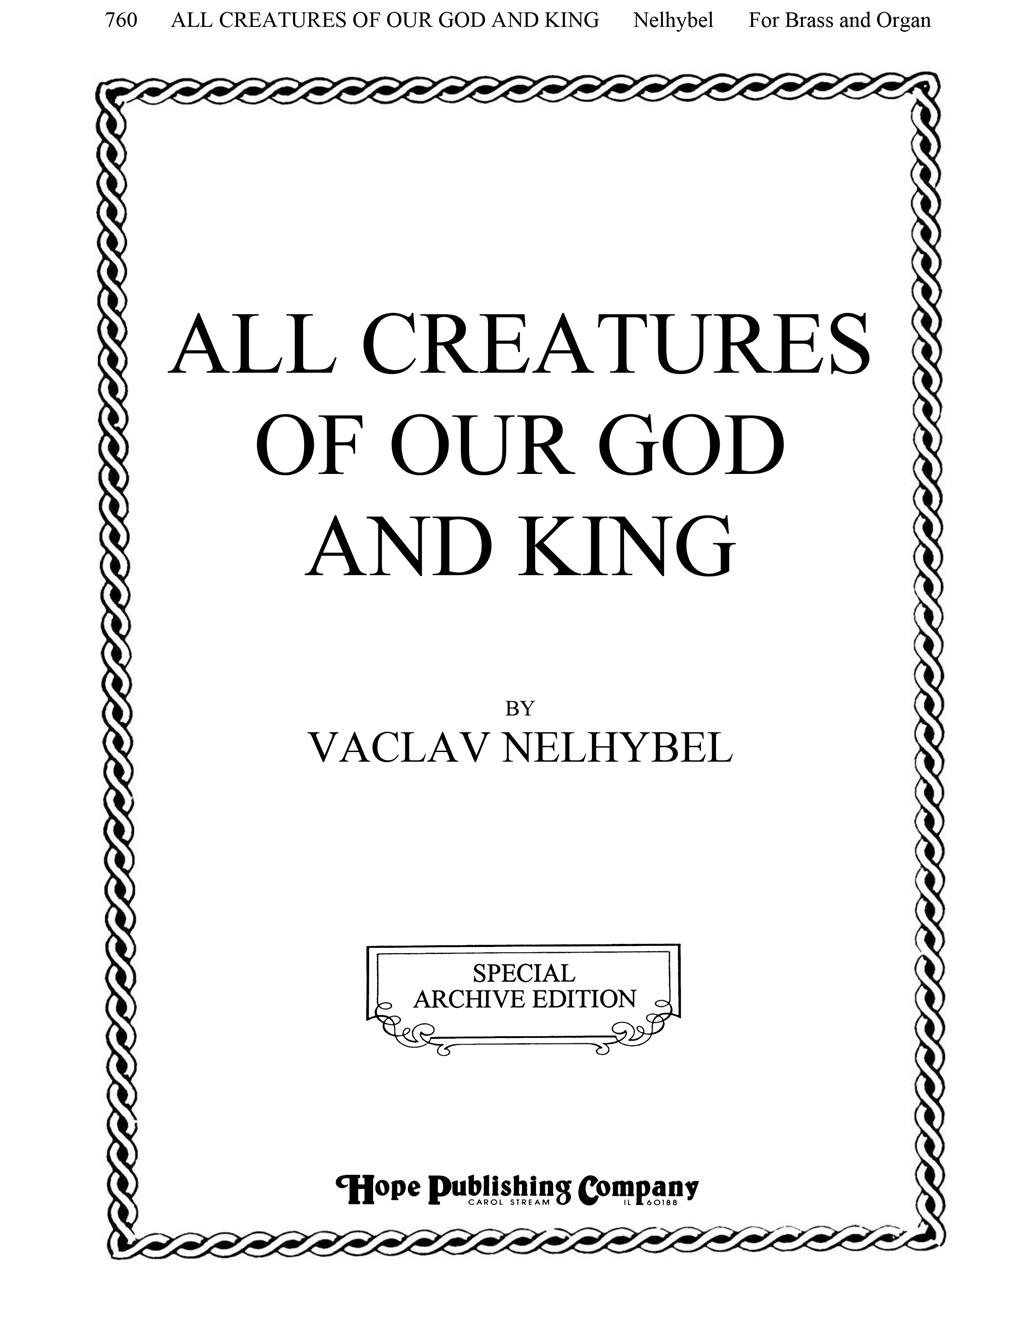 All Creatures of Our God and King - Organ and Brass Cover Image